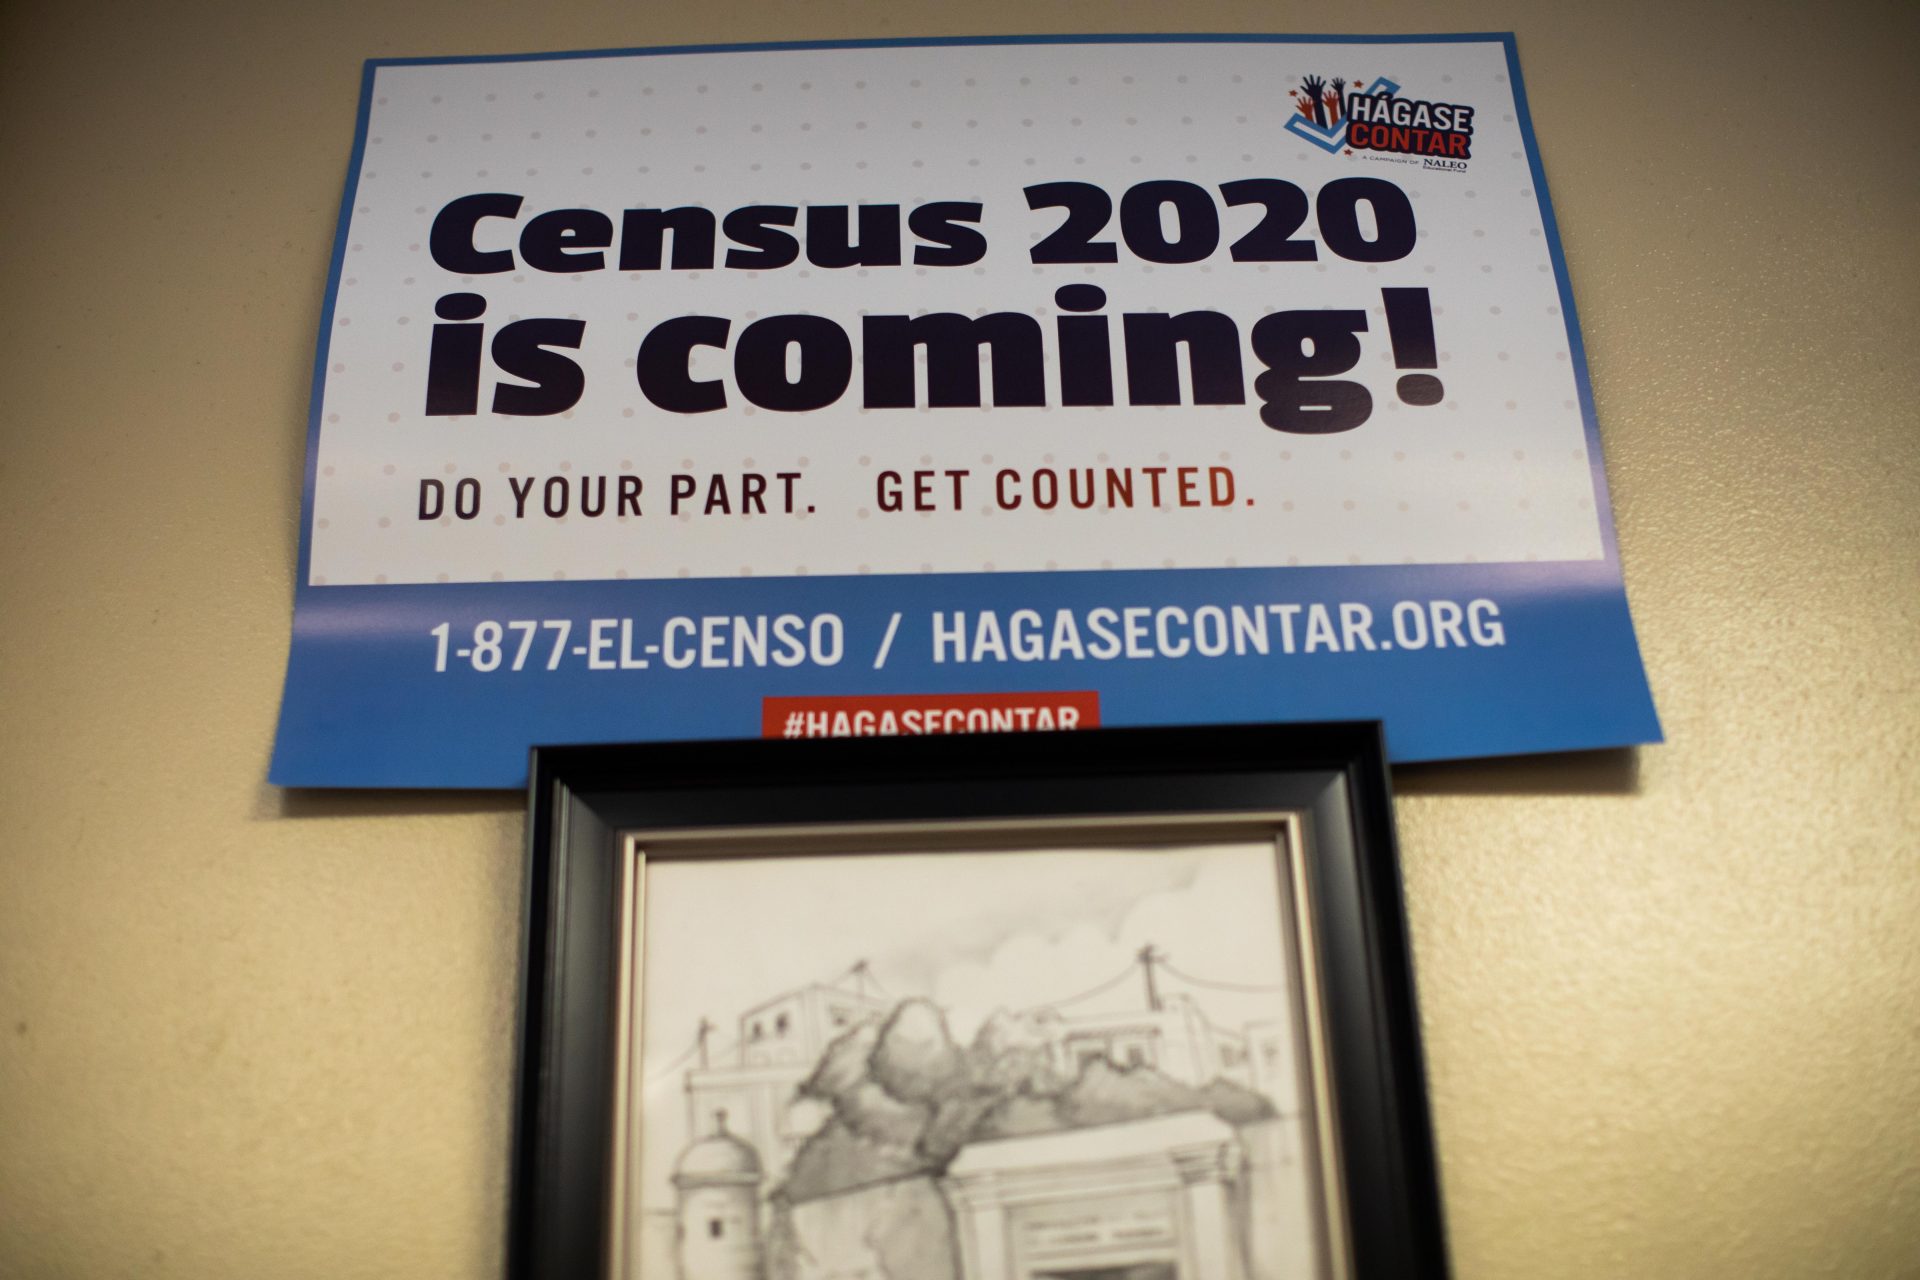 Signs posted around the offices of Ceiba in Norris Square, Kensington encourage visitors to participate in the 2020 census.